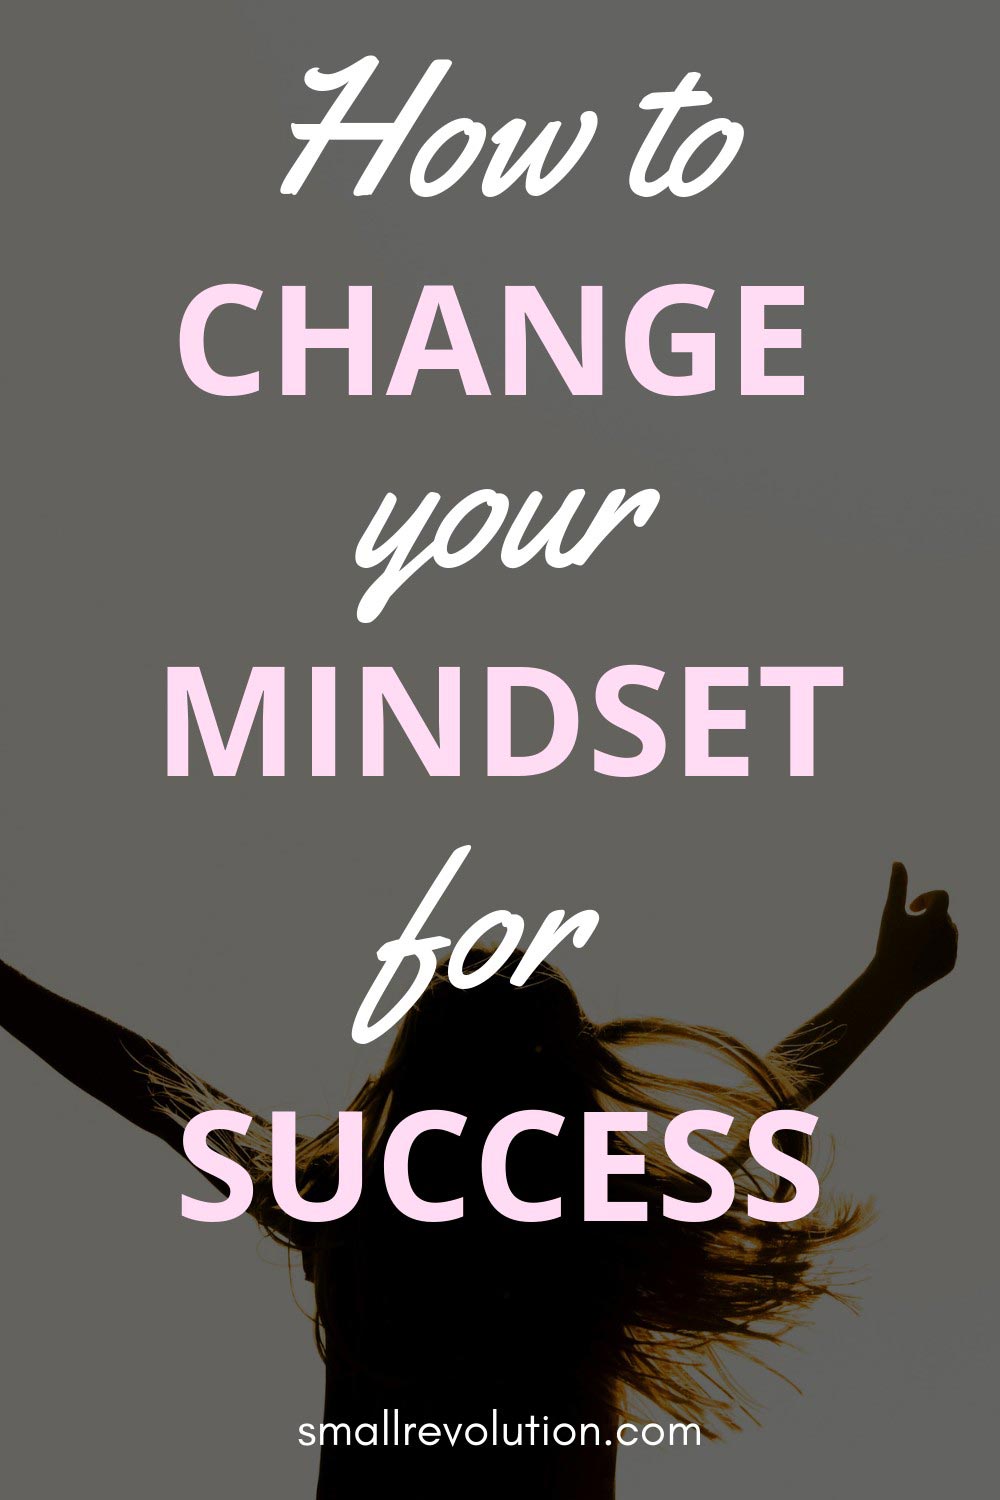 How to change your mindset for success